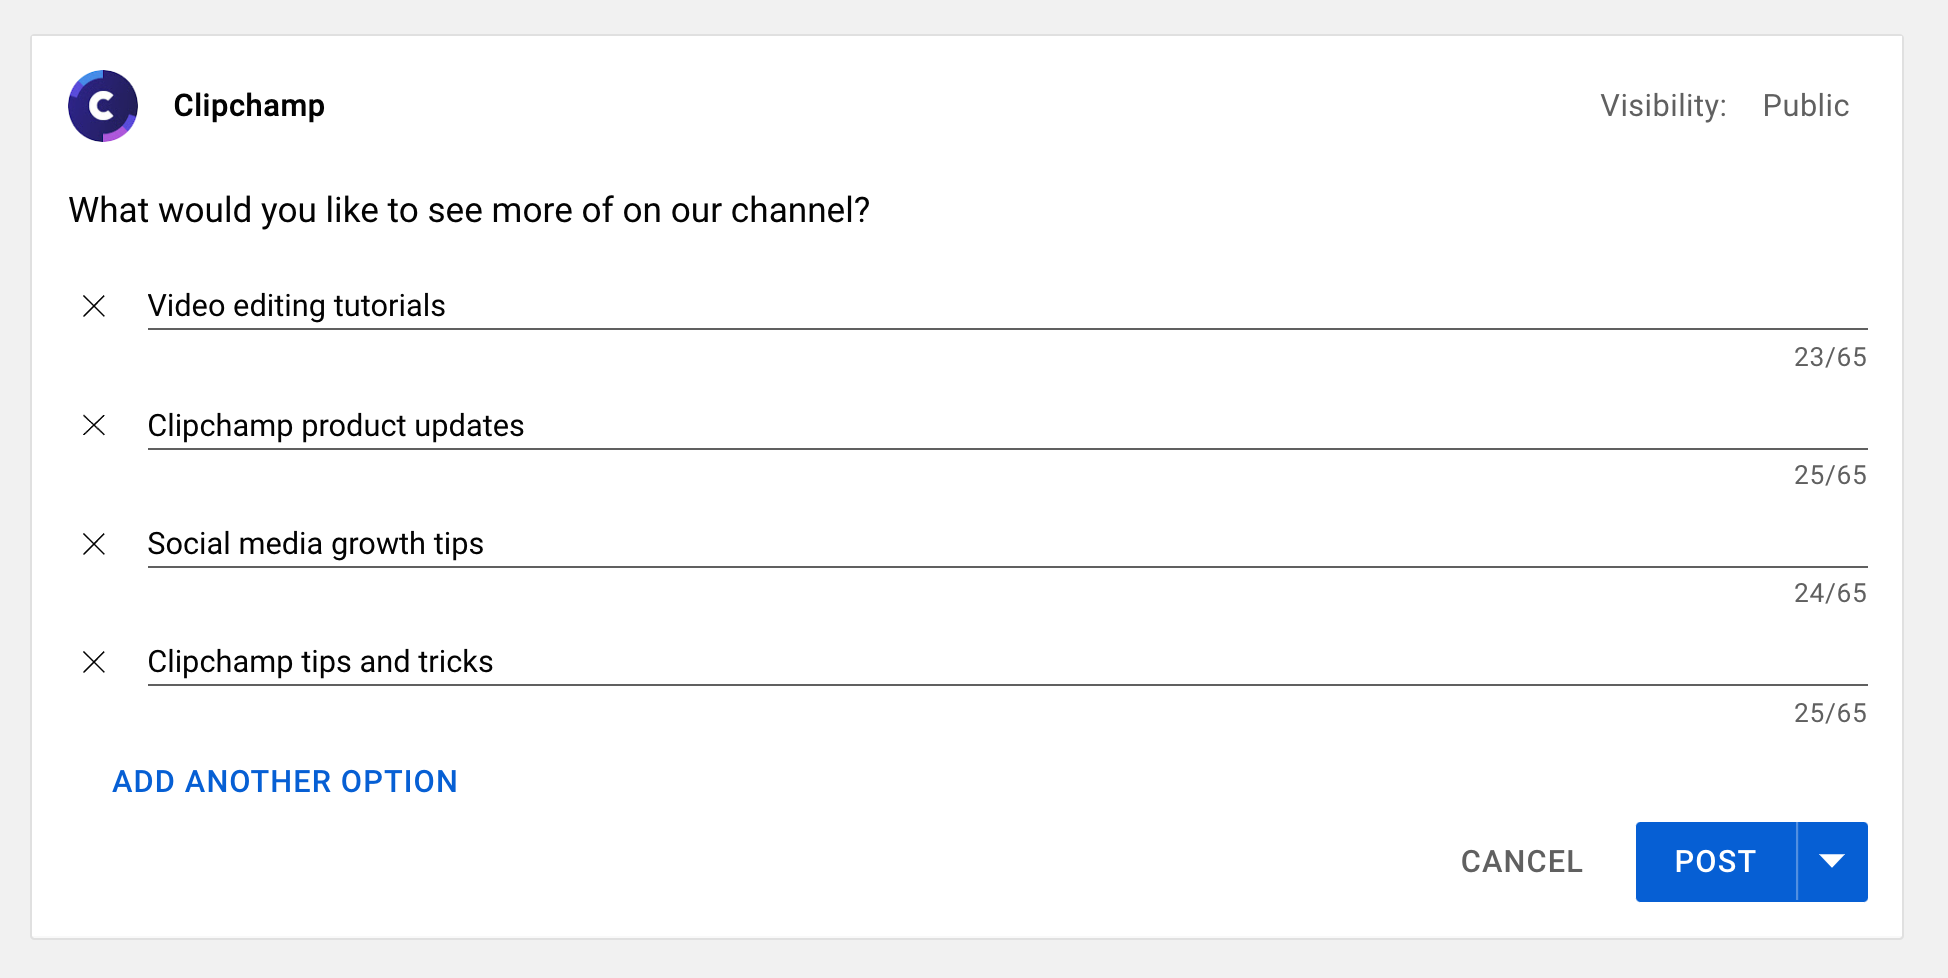 Clipchamp example YouTube poll